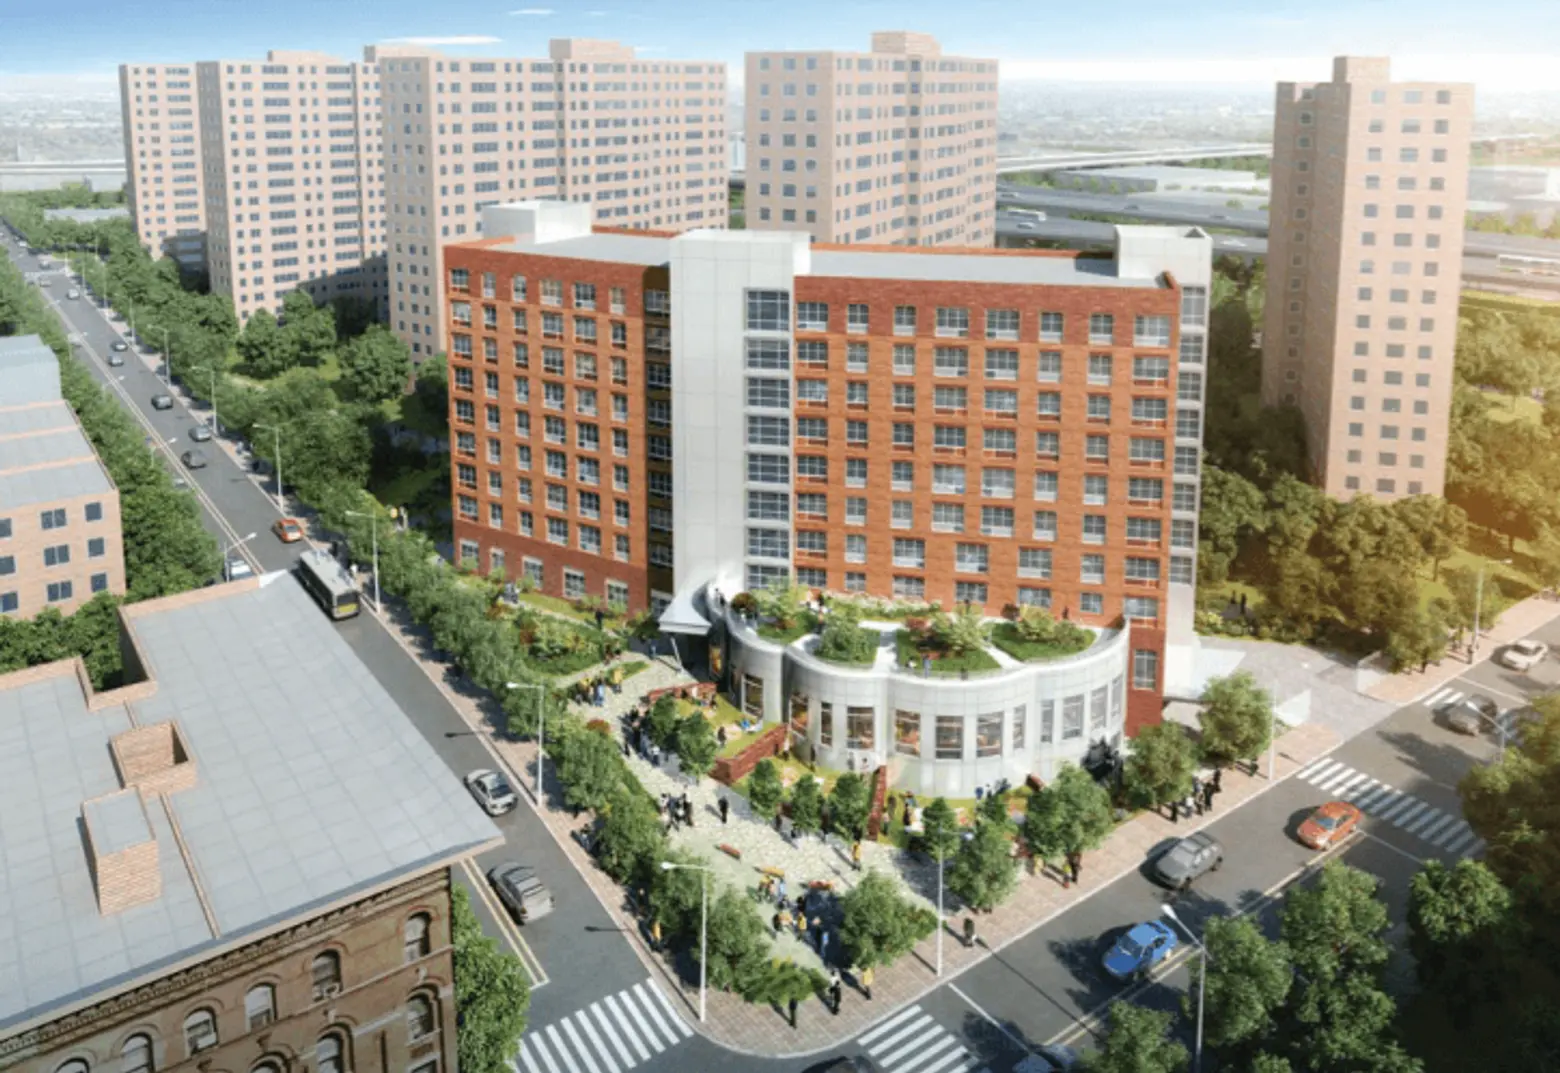 NYCHA’s open space development plans move ahead with affordable senior housing in the South Bronx